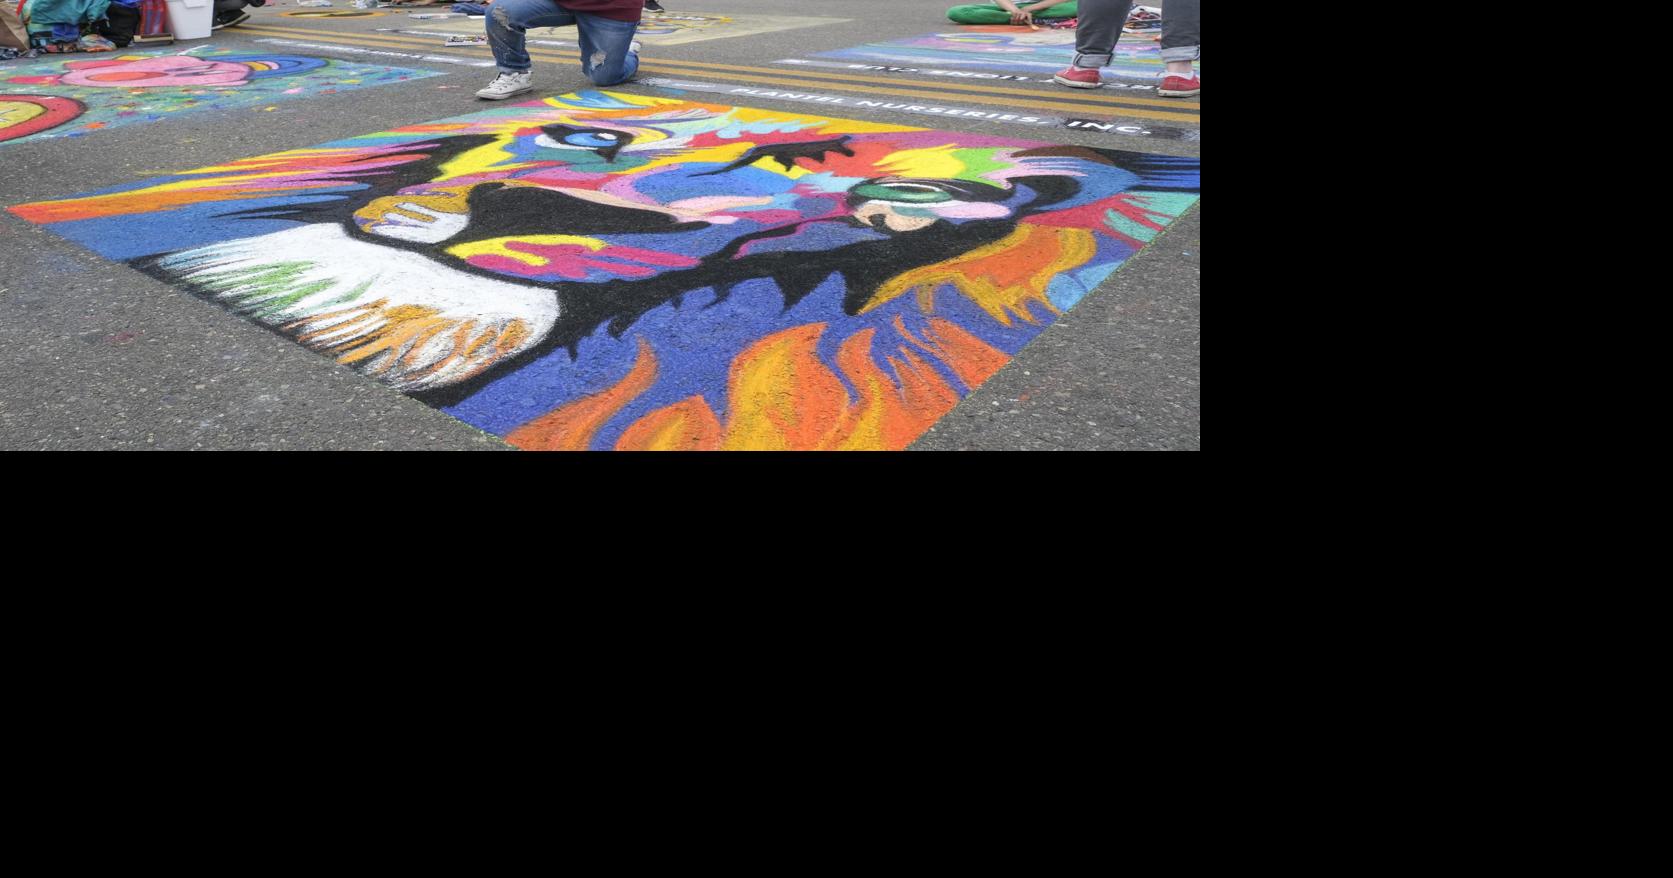 Seventh annual festival transforms Old Town Orcutt into chalk art